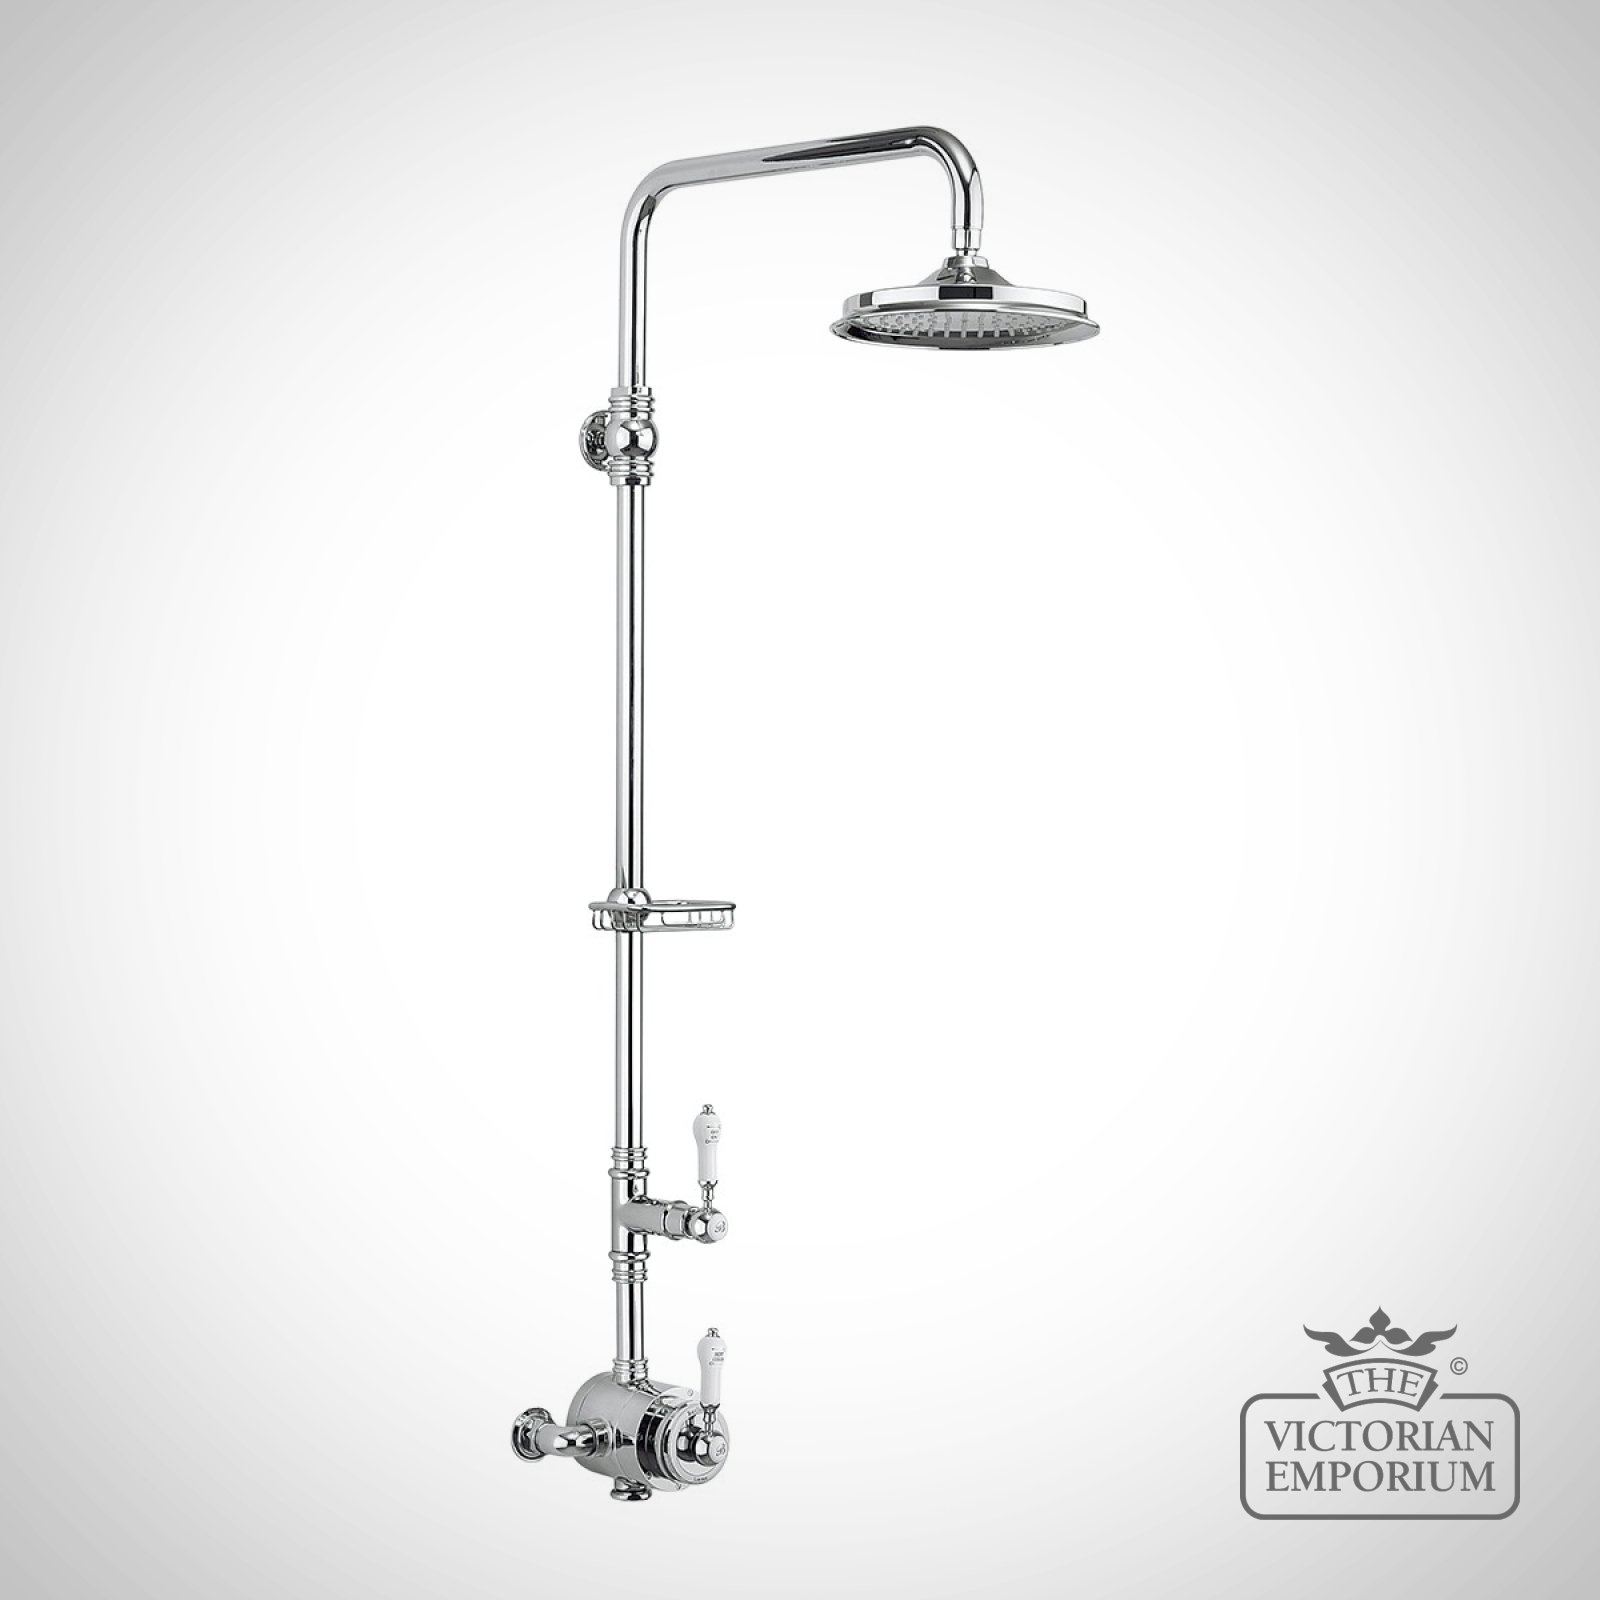 Stowe Thermostatic Exposed Shower Valve Single Outlet, Rigid Riser, Fixed Shower Arm & Soap Basket